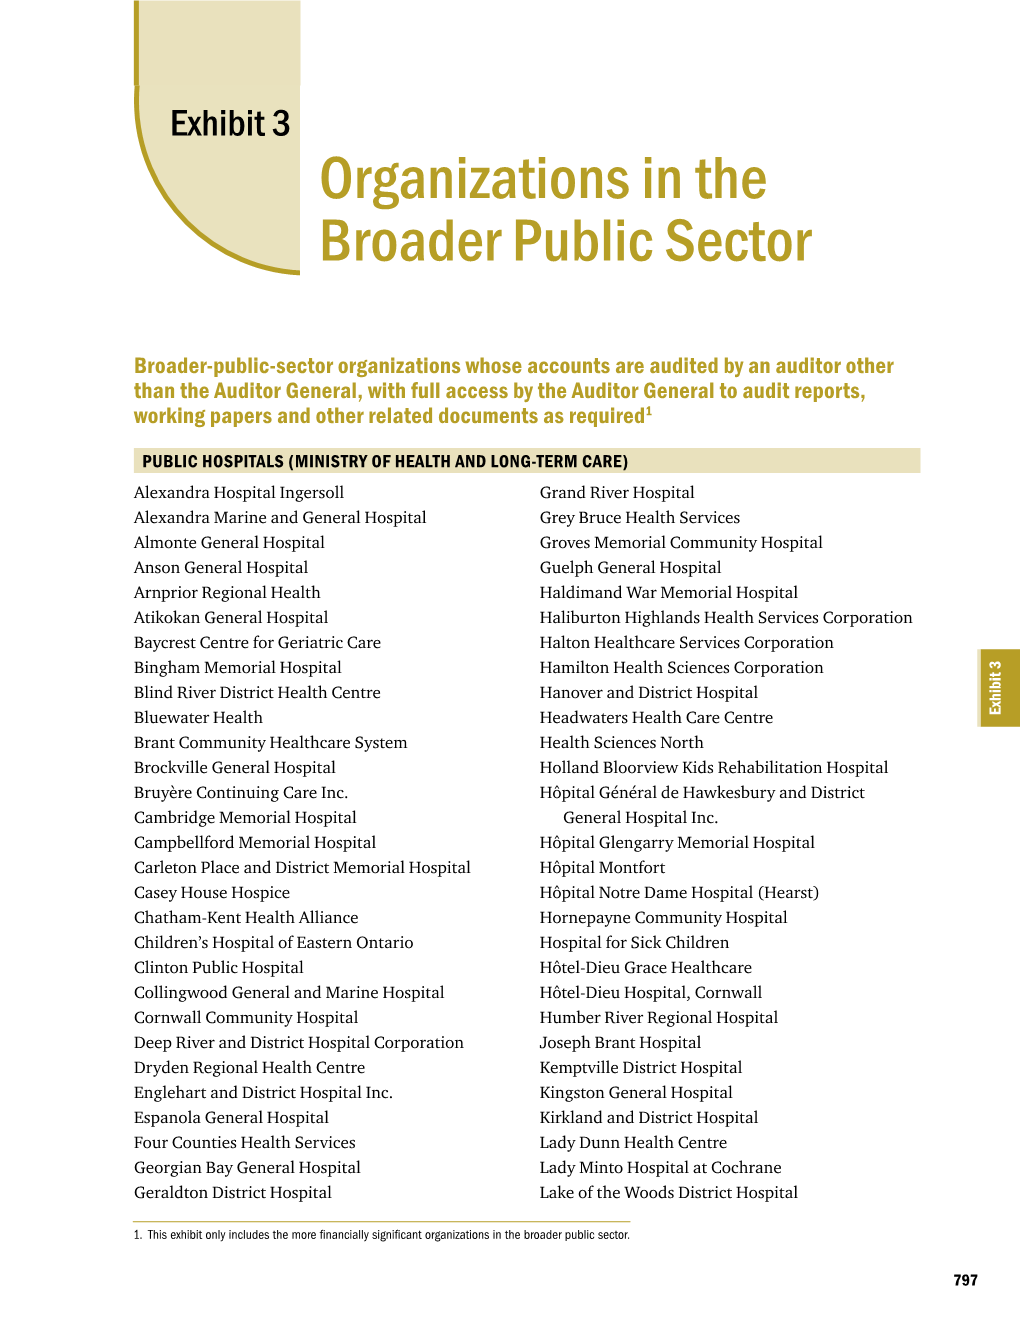 Exhibit 3 Organizations in the Broader Public Sector